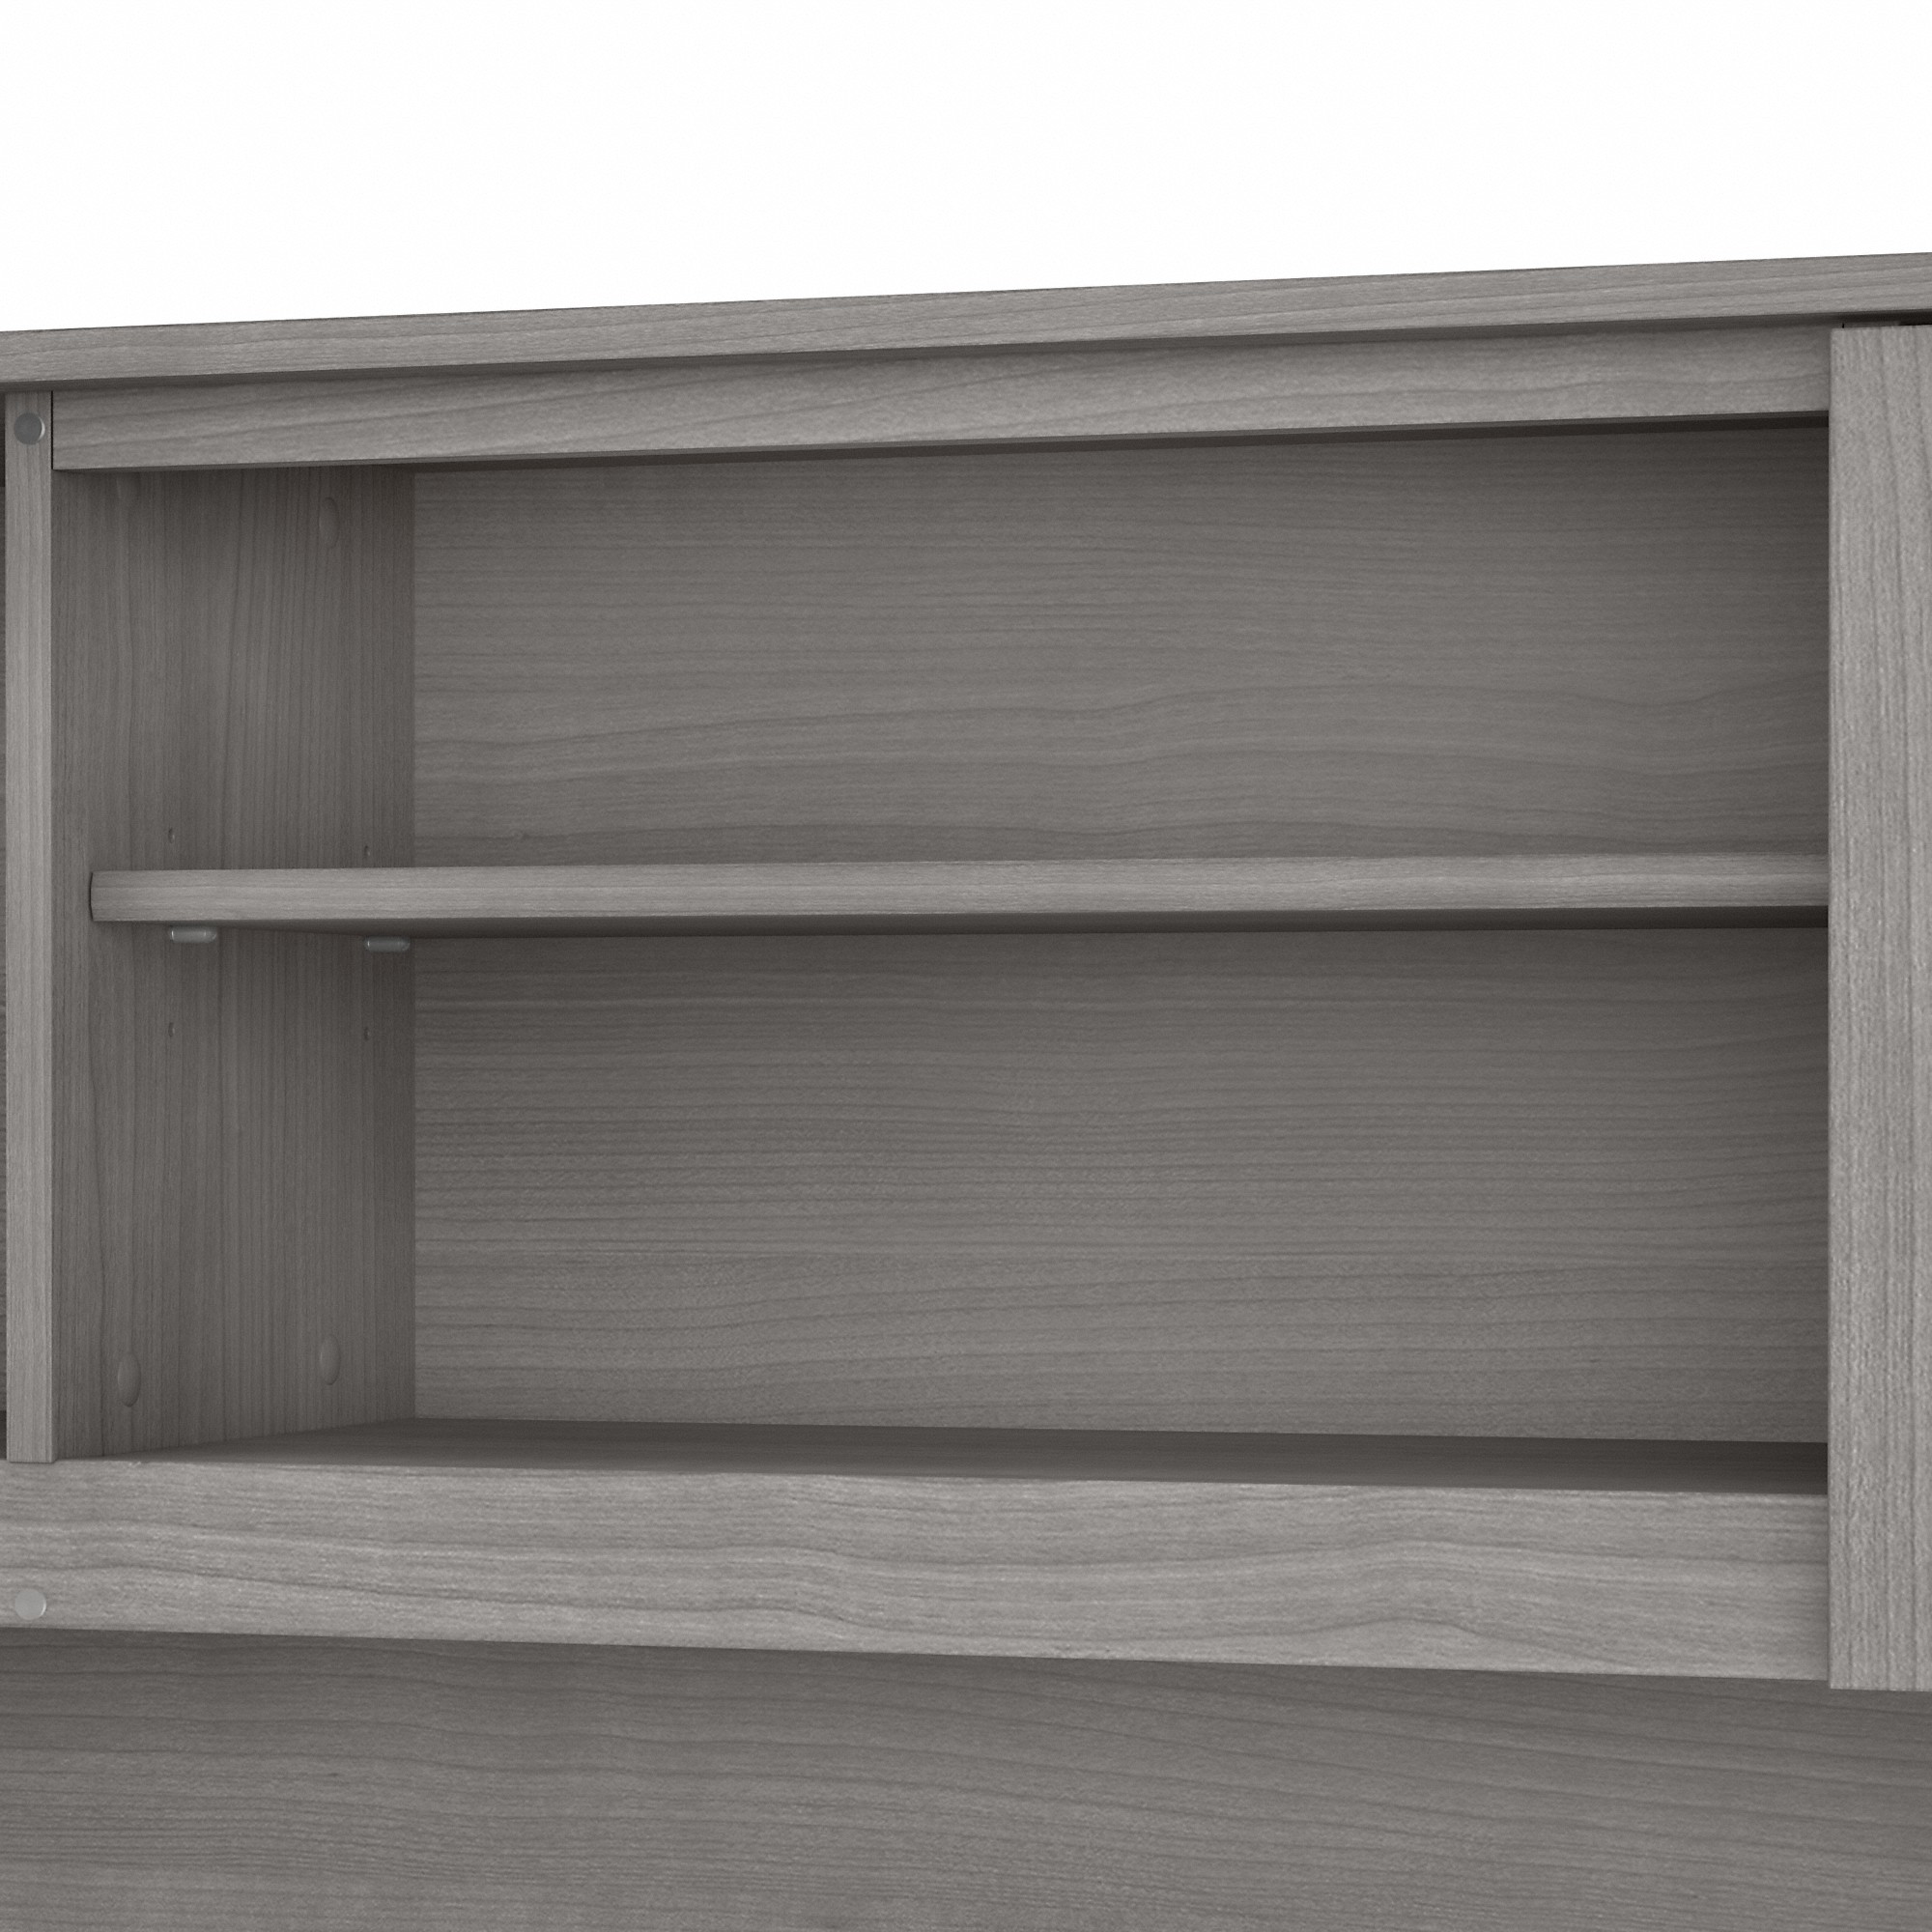 Bush Furniture Somerset 60 in 2-Door Hutch with Open Storage in Platinum Gray - fits on Somerset 60 in L Desk (Sold Separately) - image 5 of 8